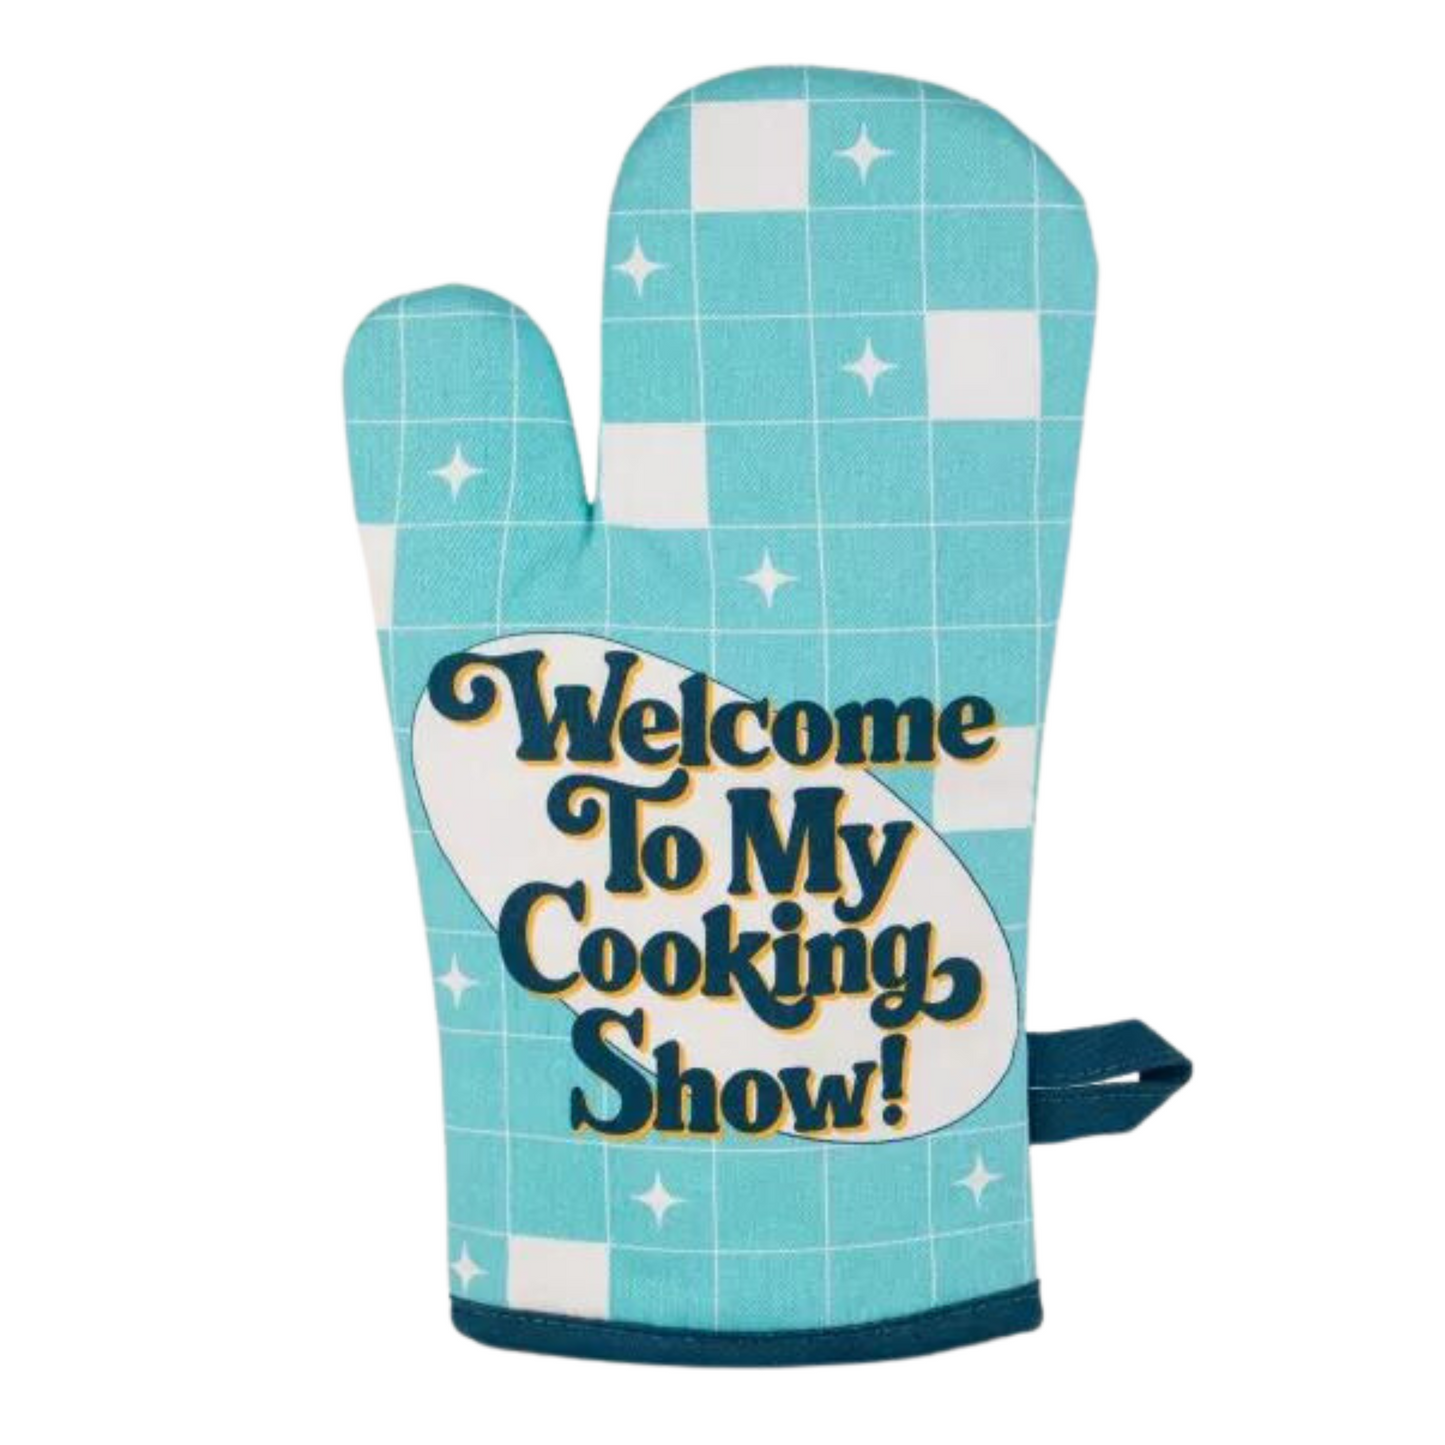 Oven Mitt - Welcome To My Cooking Show!